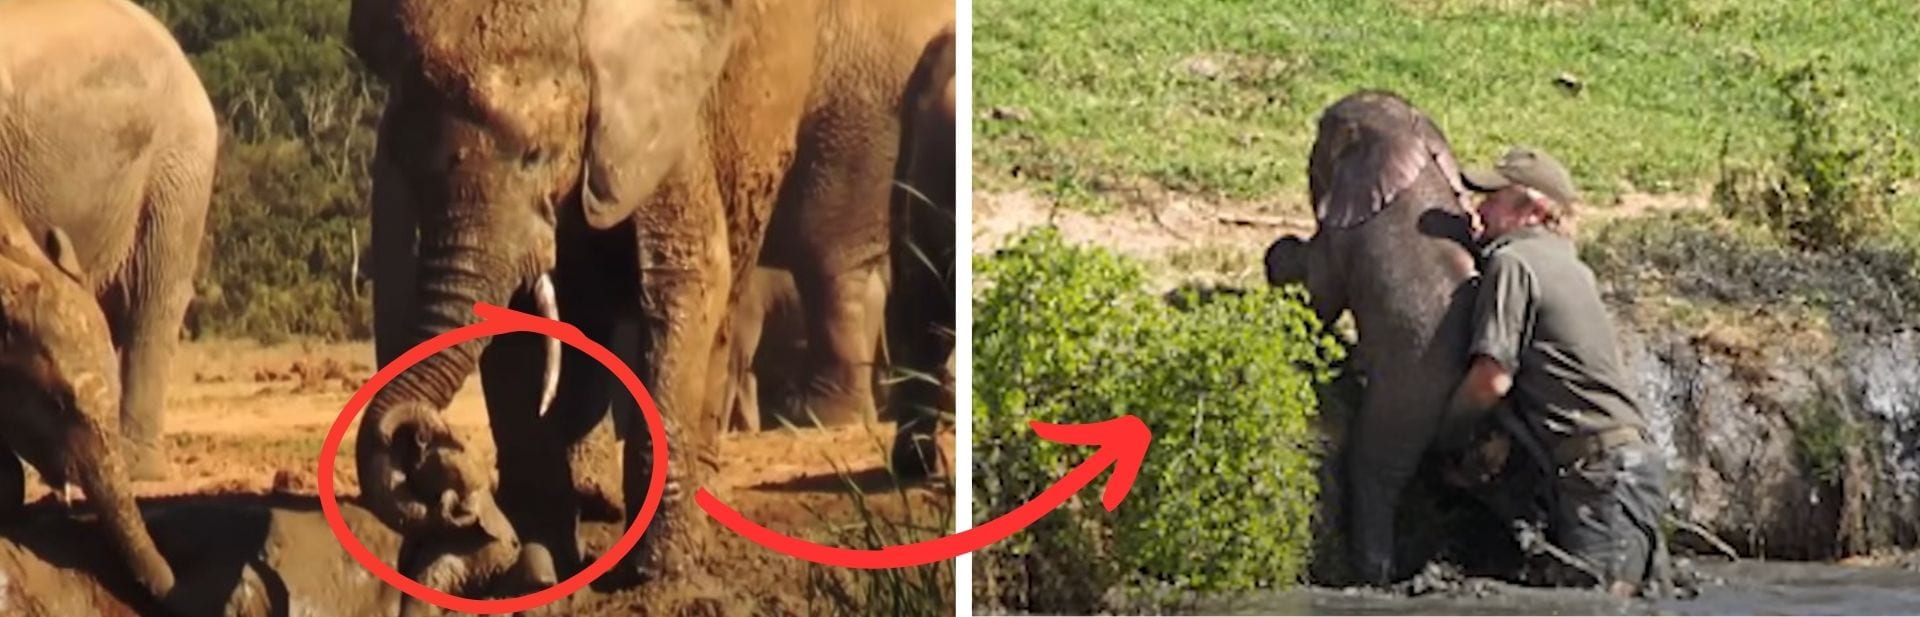 Drowning Baby Elephant got a Herd of Elephants and a Group of Humans Saving Him